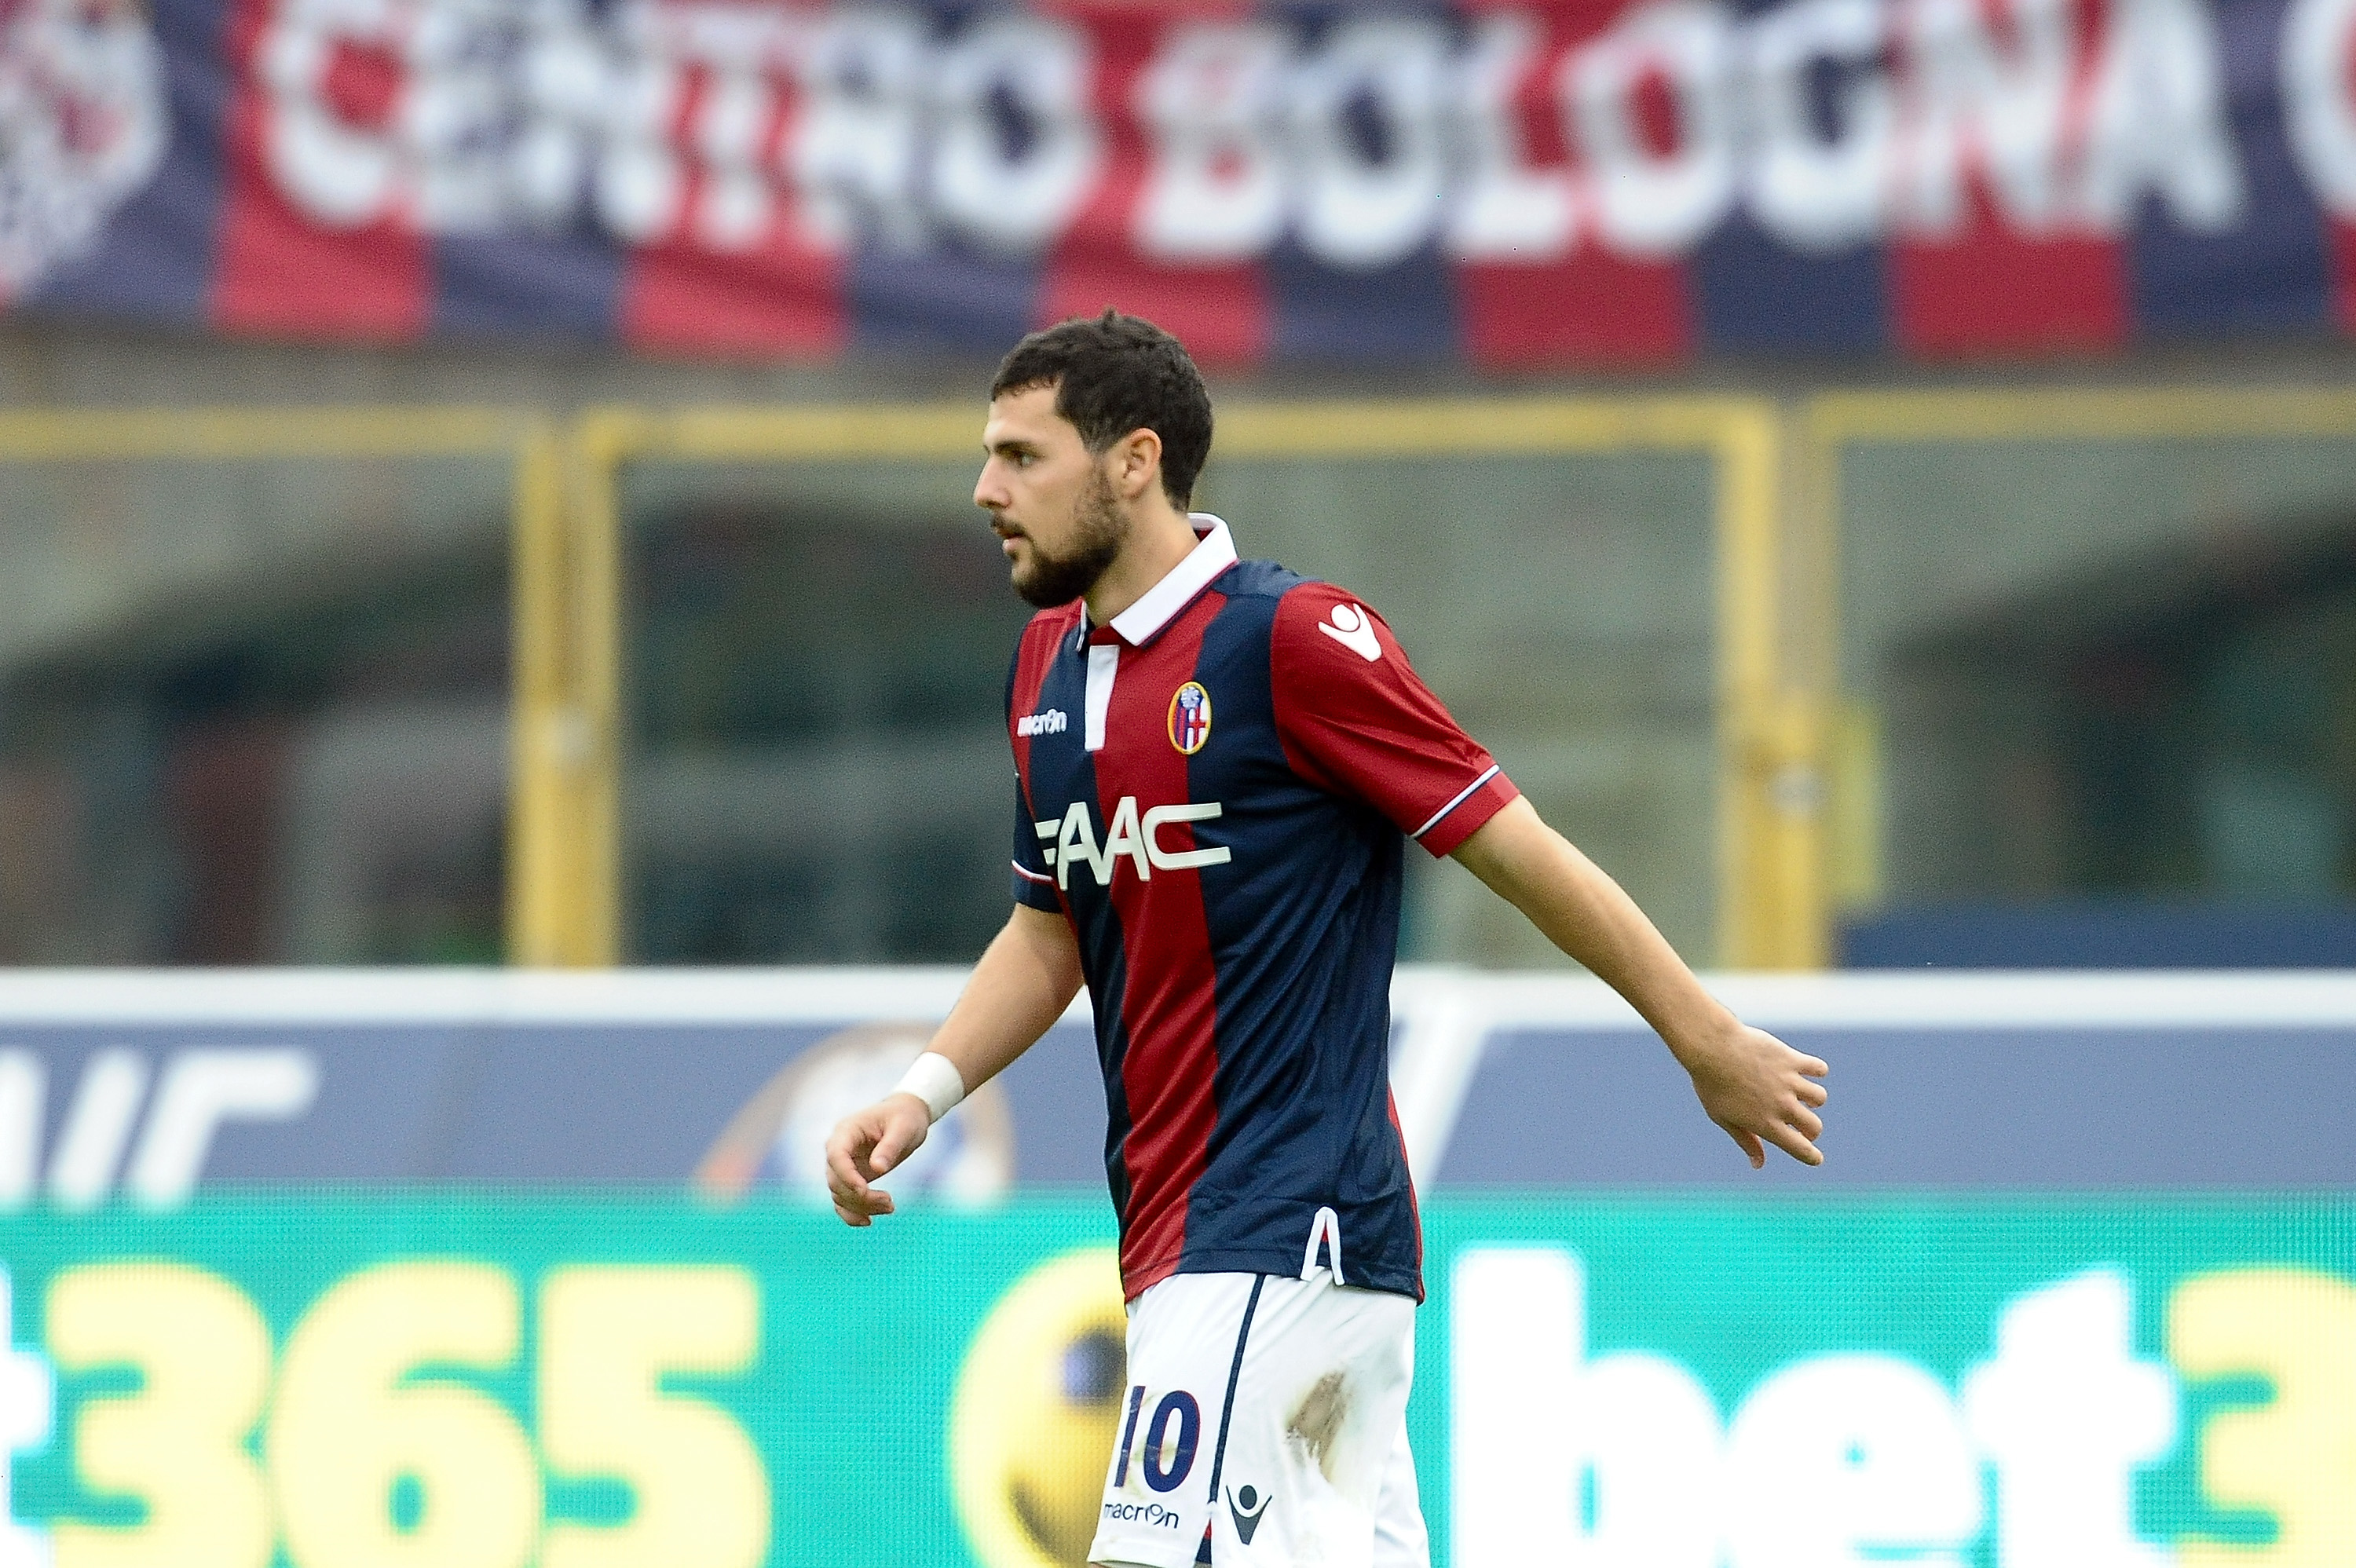 Many injuries and doubts for Bologna ahead of Inter